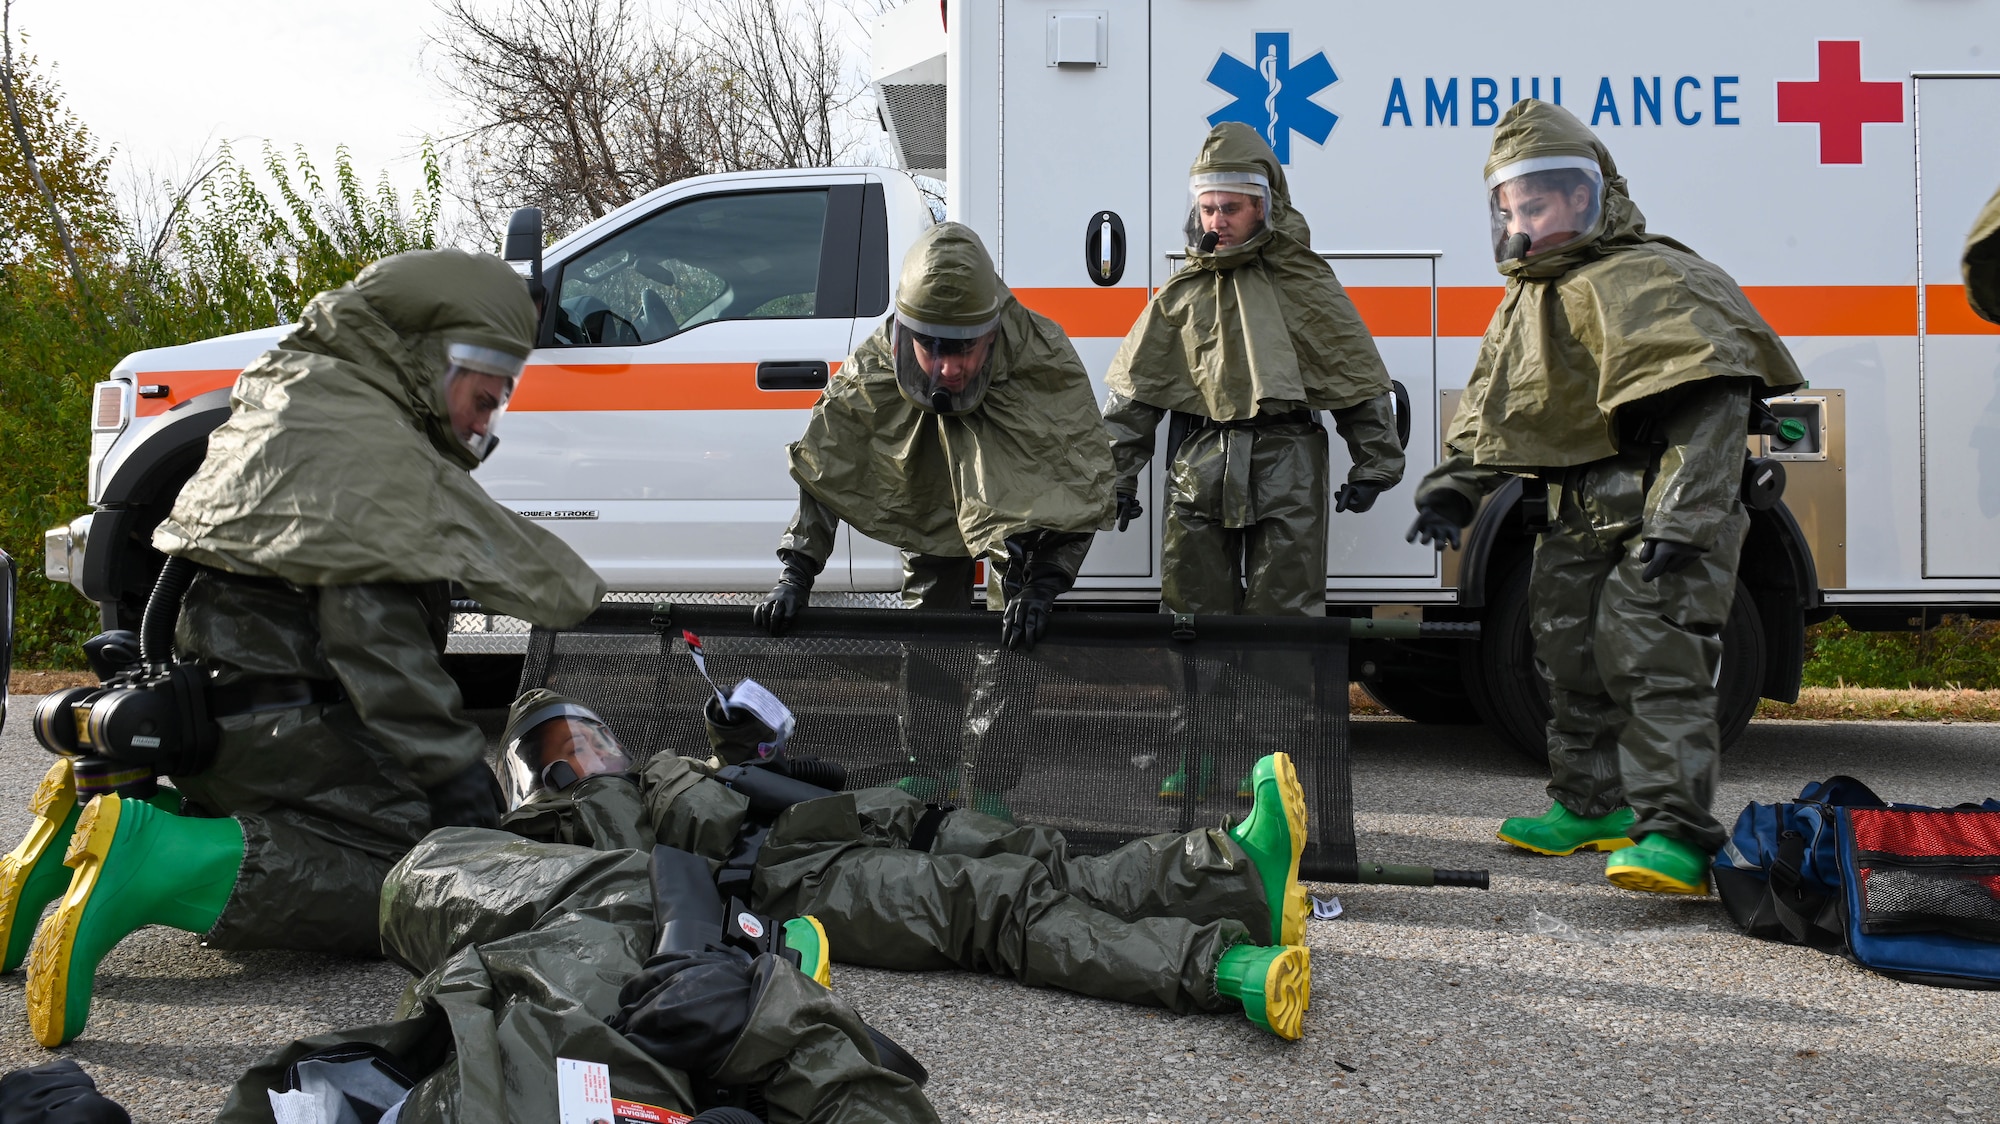 U.S. Air Force Airmen assigned to the 509th Medical Group participate in a medical preparedness exercise at Whiteman Air Force Base, Missouri, October 27, 2022. Multiple teams include in-place patient decontamination, triage, clinical, mental health, simulated emergency operations center, security, lab-bio detection, medical control center, logistics, pharmacy, and patient administration to assess and triage the casualties and their injuries. (U.S. Air Force photo by Airman 1st Class Hailey Farrell)